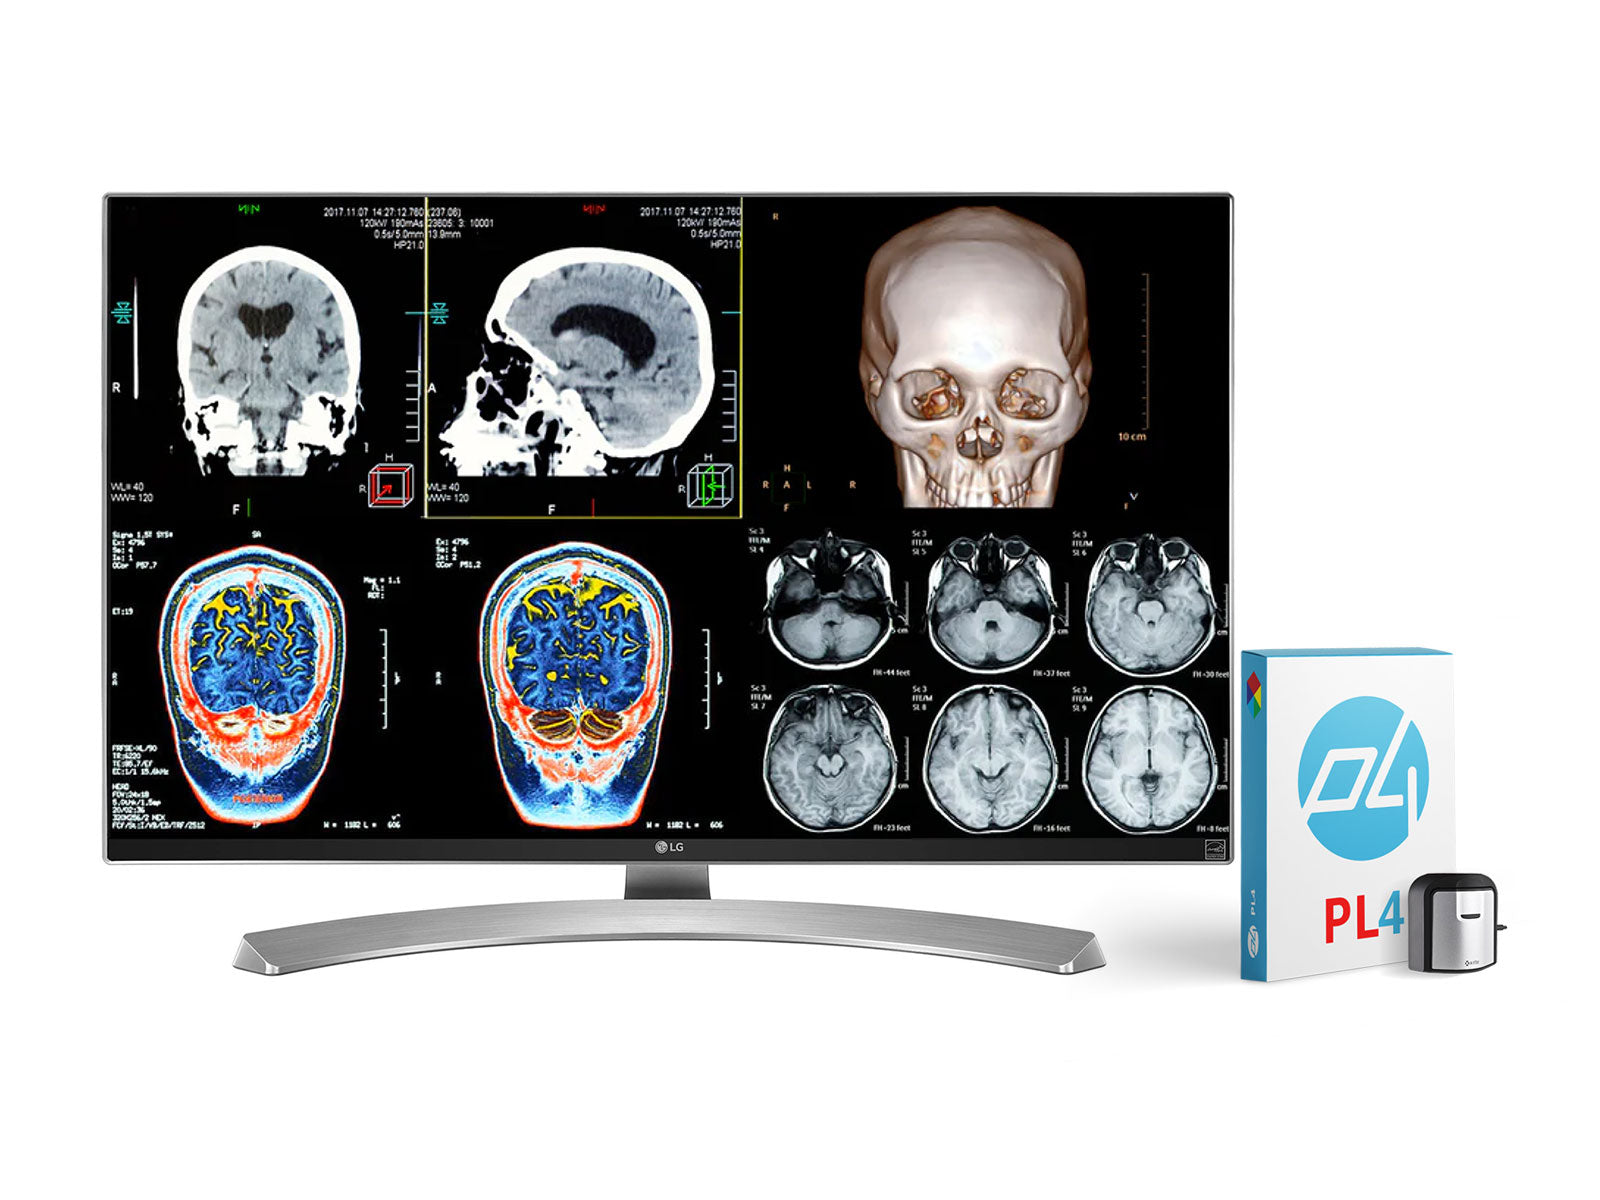 LG 27" 8MP Color Clinical Review Medical Display Monitor (27M-W)